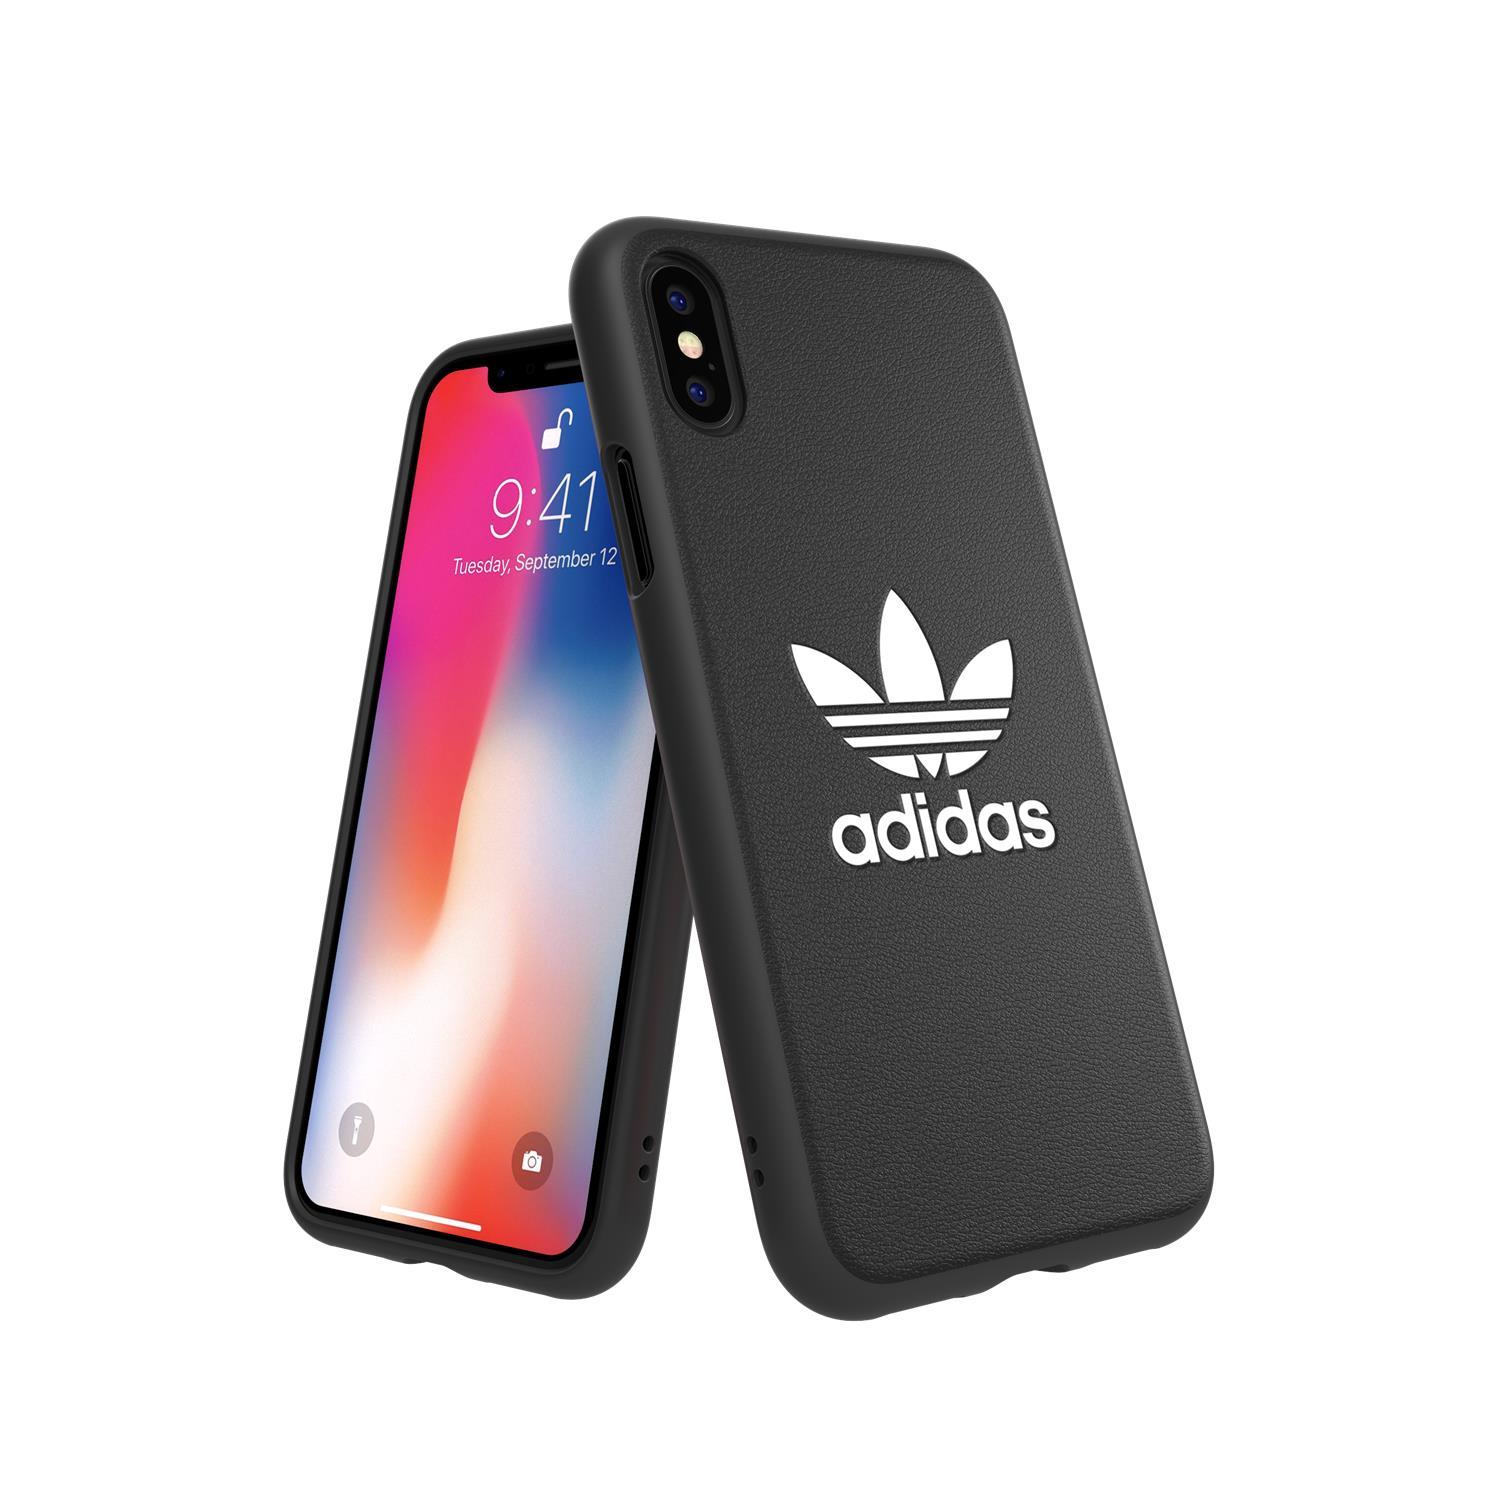 adidas OR Moulded Case BASIC für iPhone X/Xs black/white